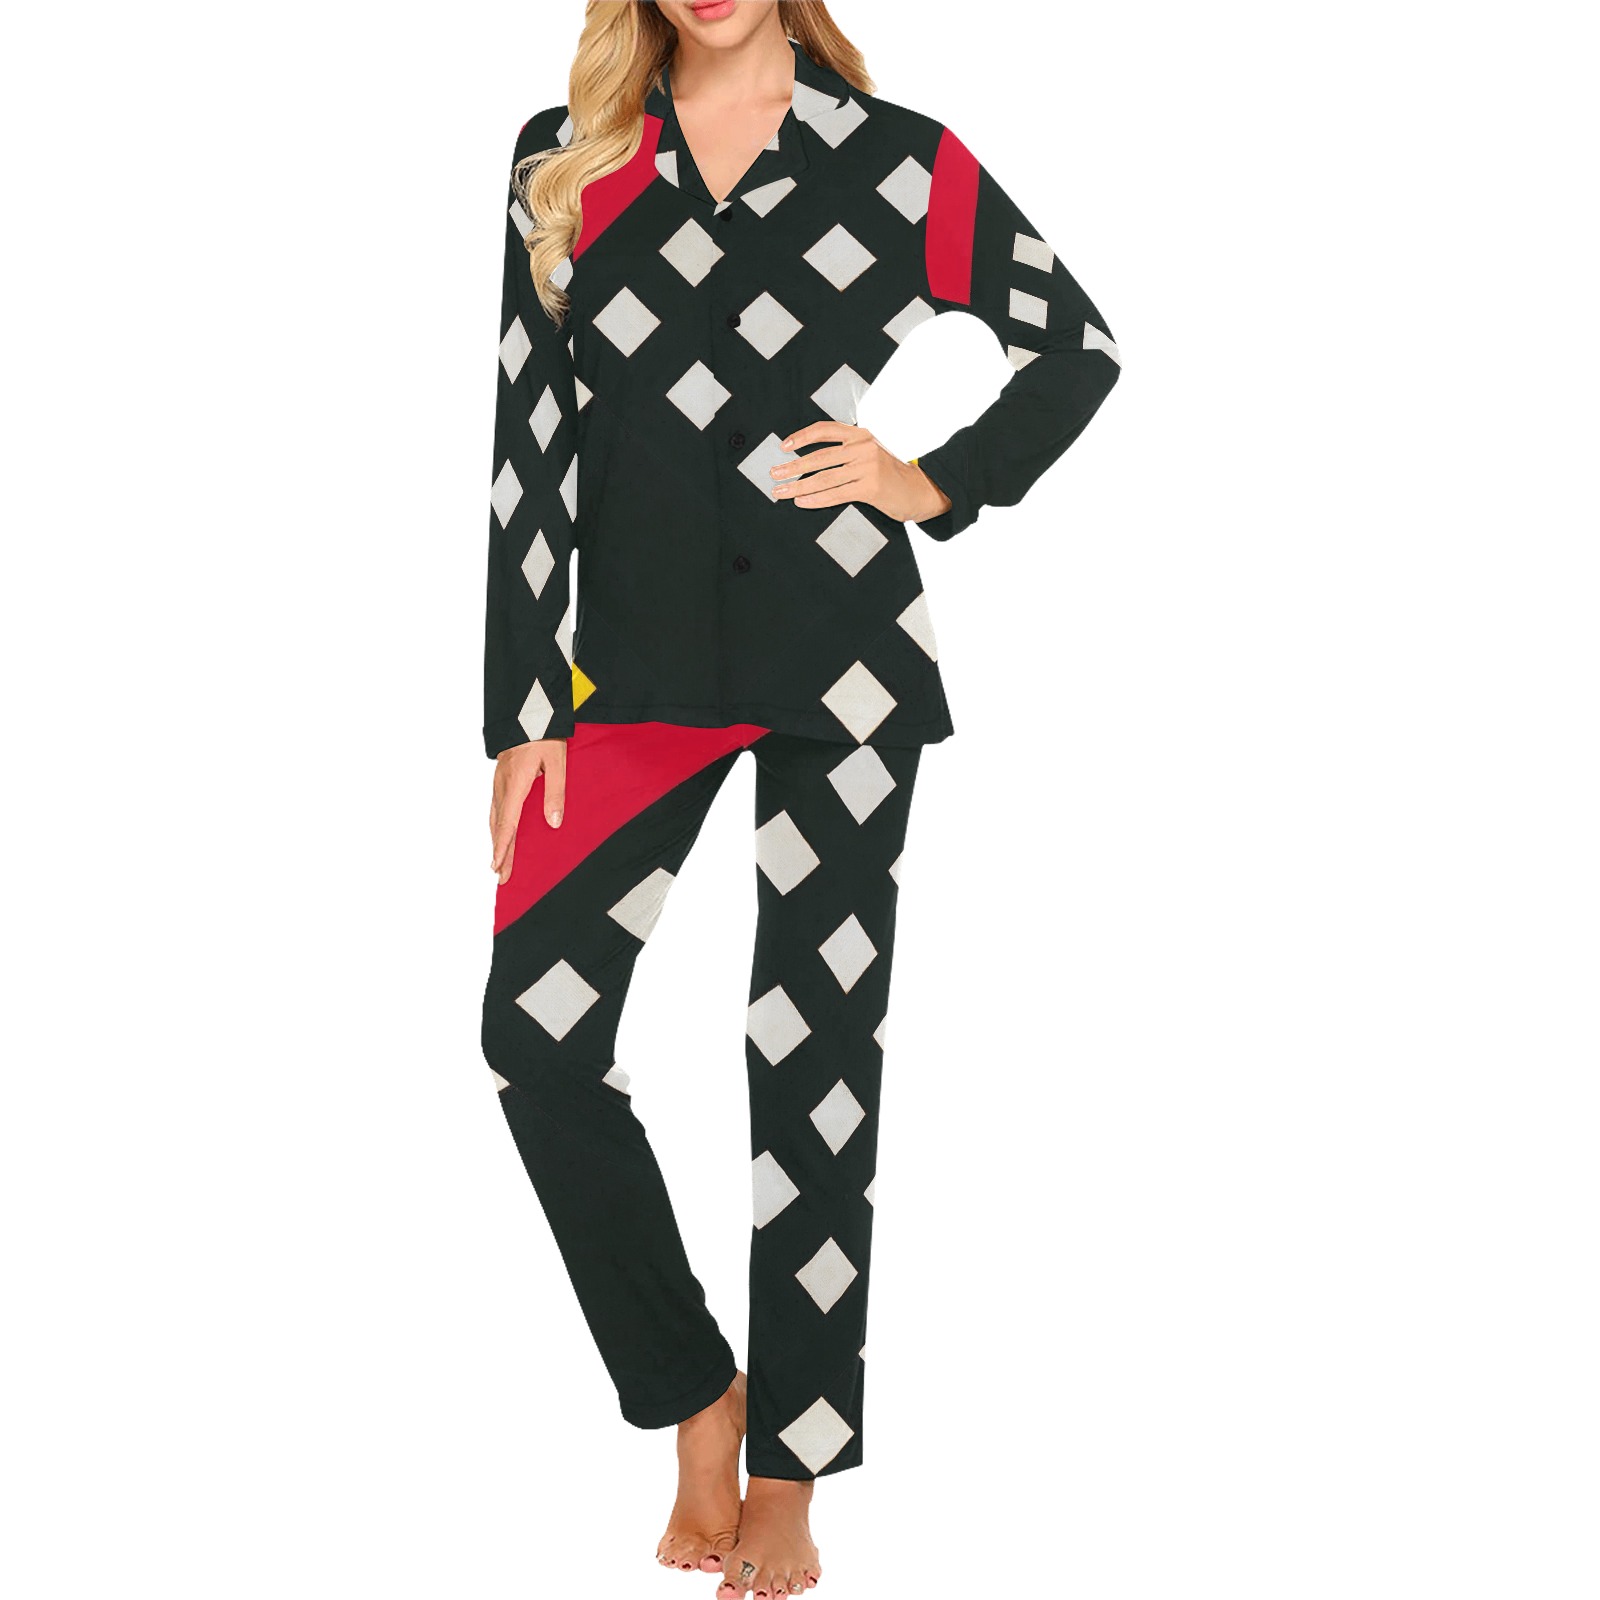 Counter-composition XV by Theo van Doesburg- Women's Long Pajama Set